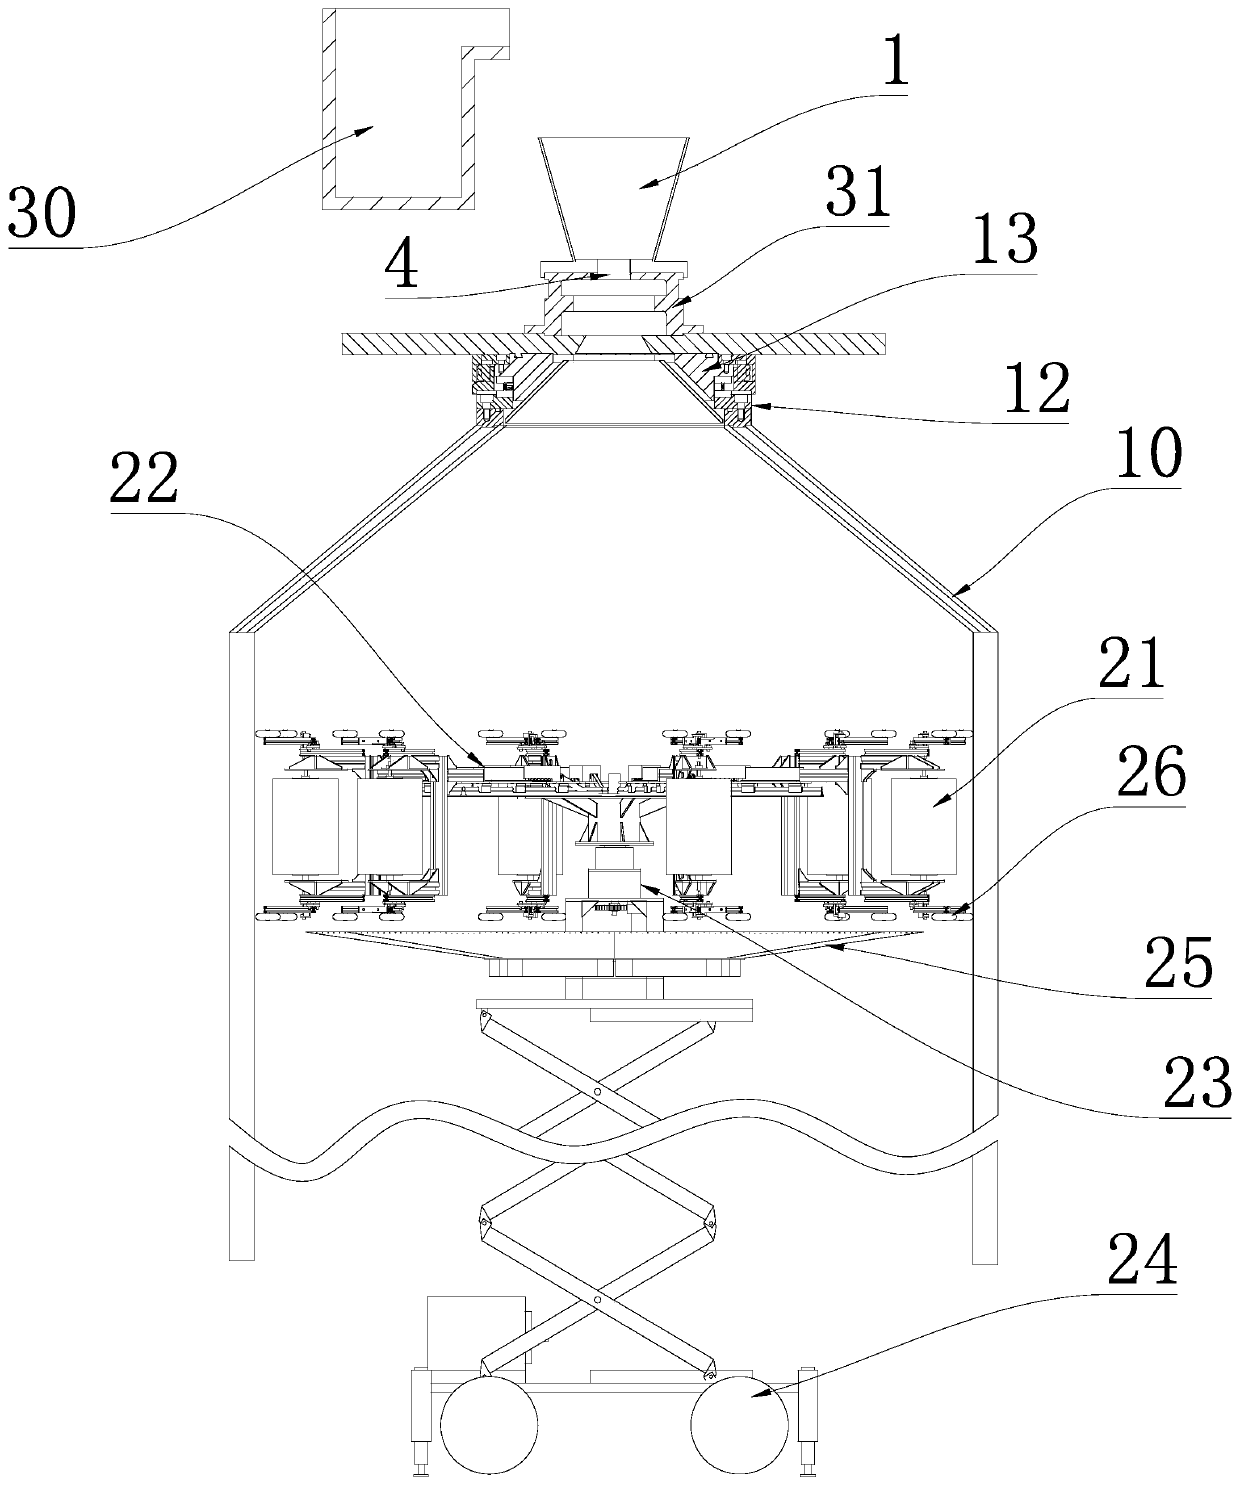 Powder cleaning device for atomizing powder manufacturing equipment